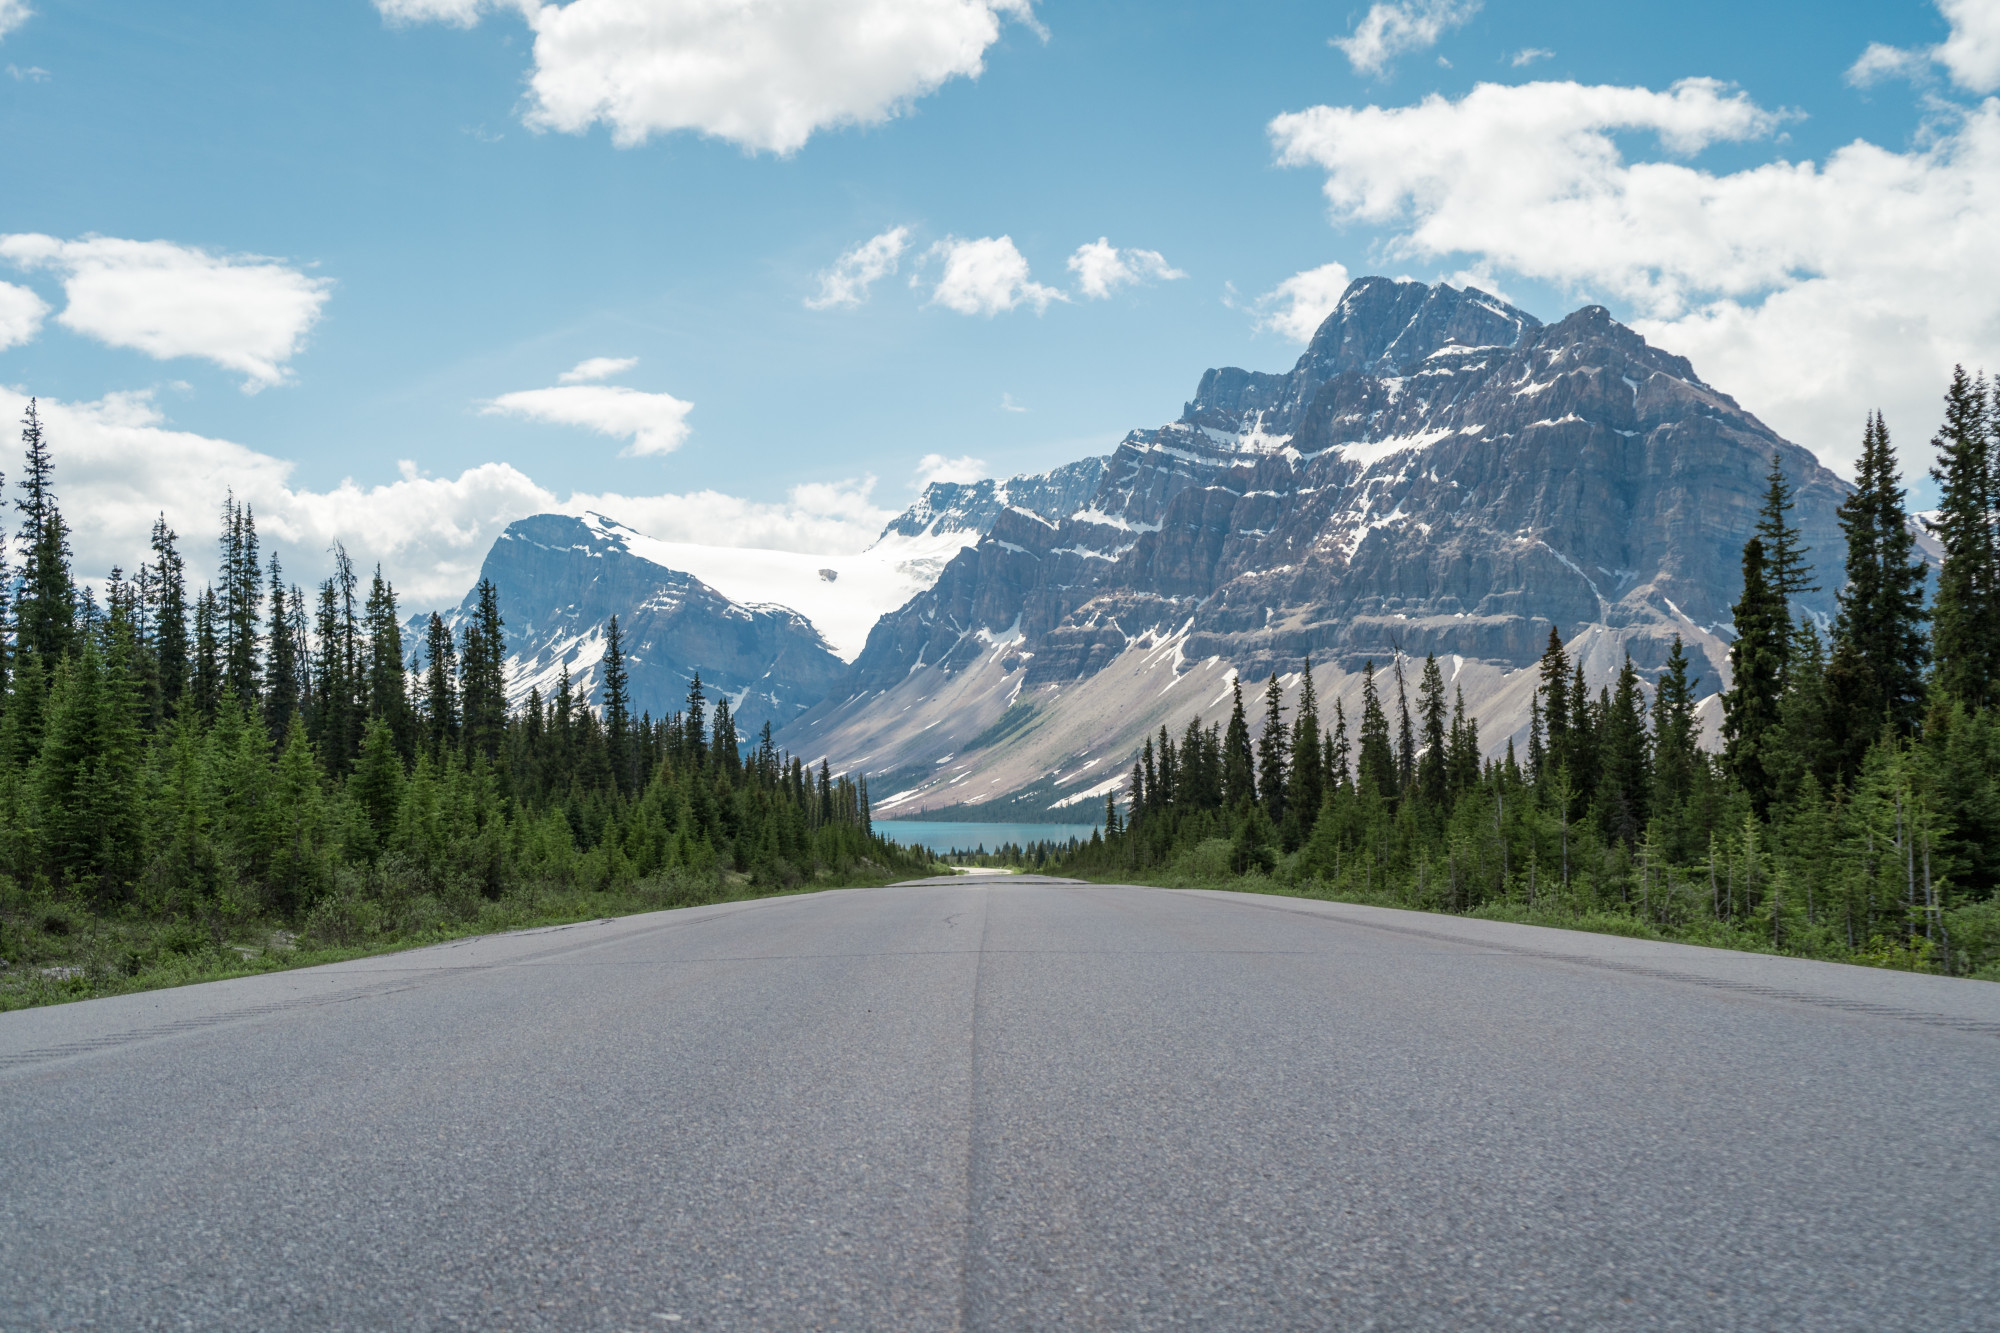 Icefields Parkway in Canada